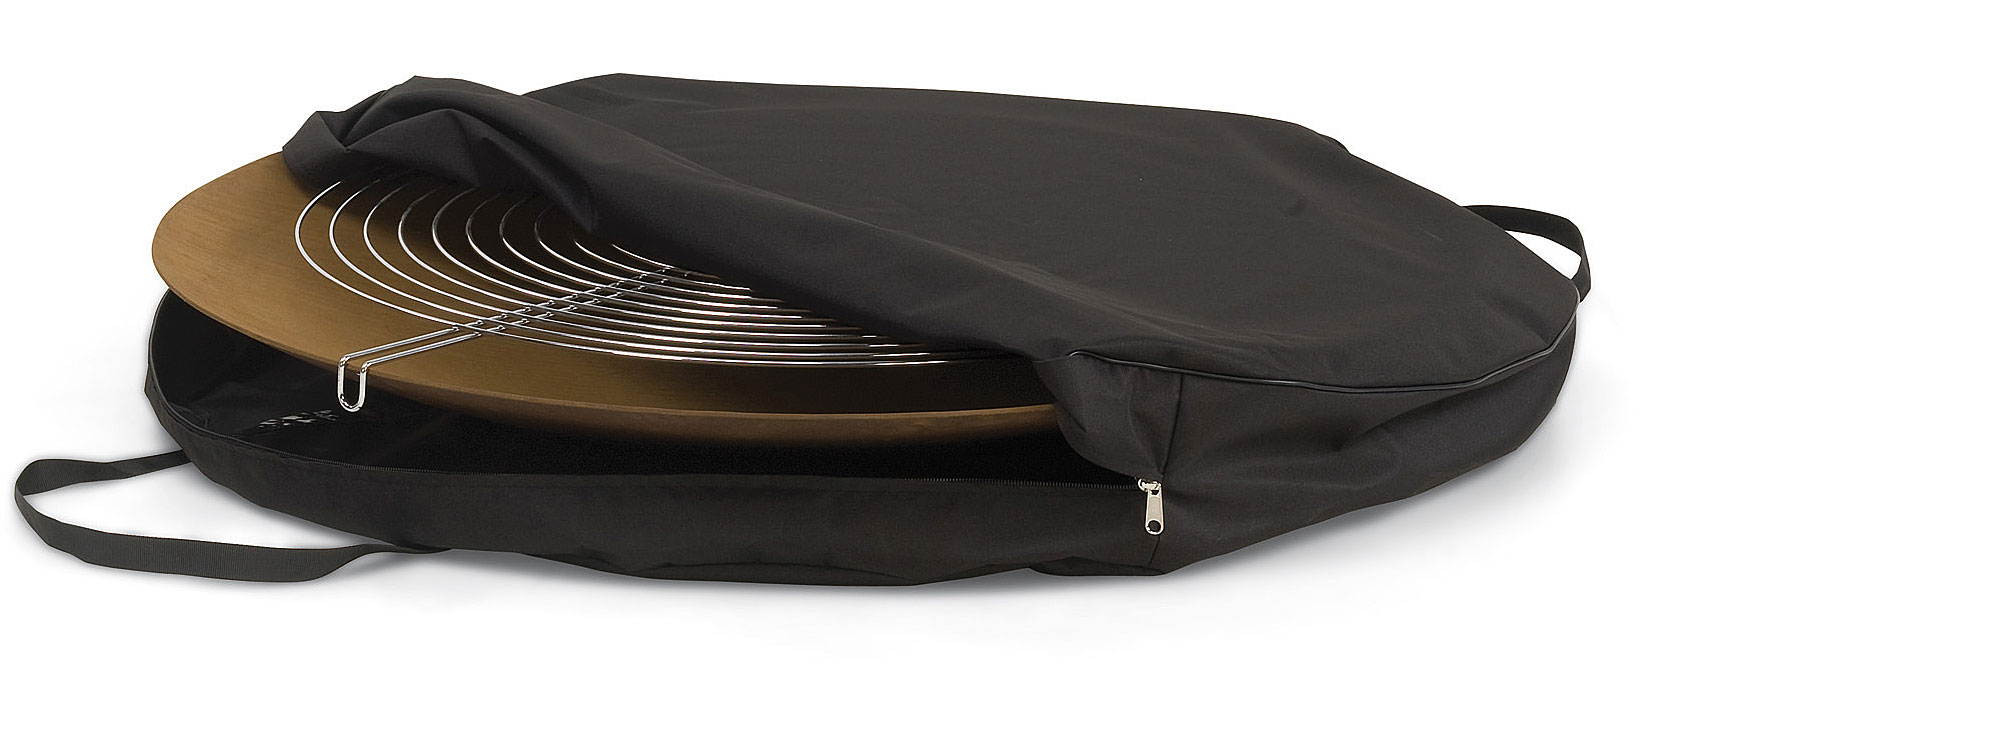 Image of Discolo fire pit carry bag by AK47 Design